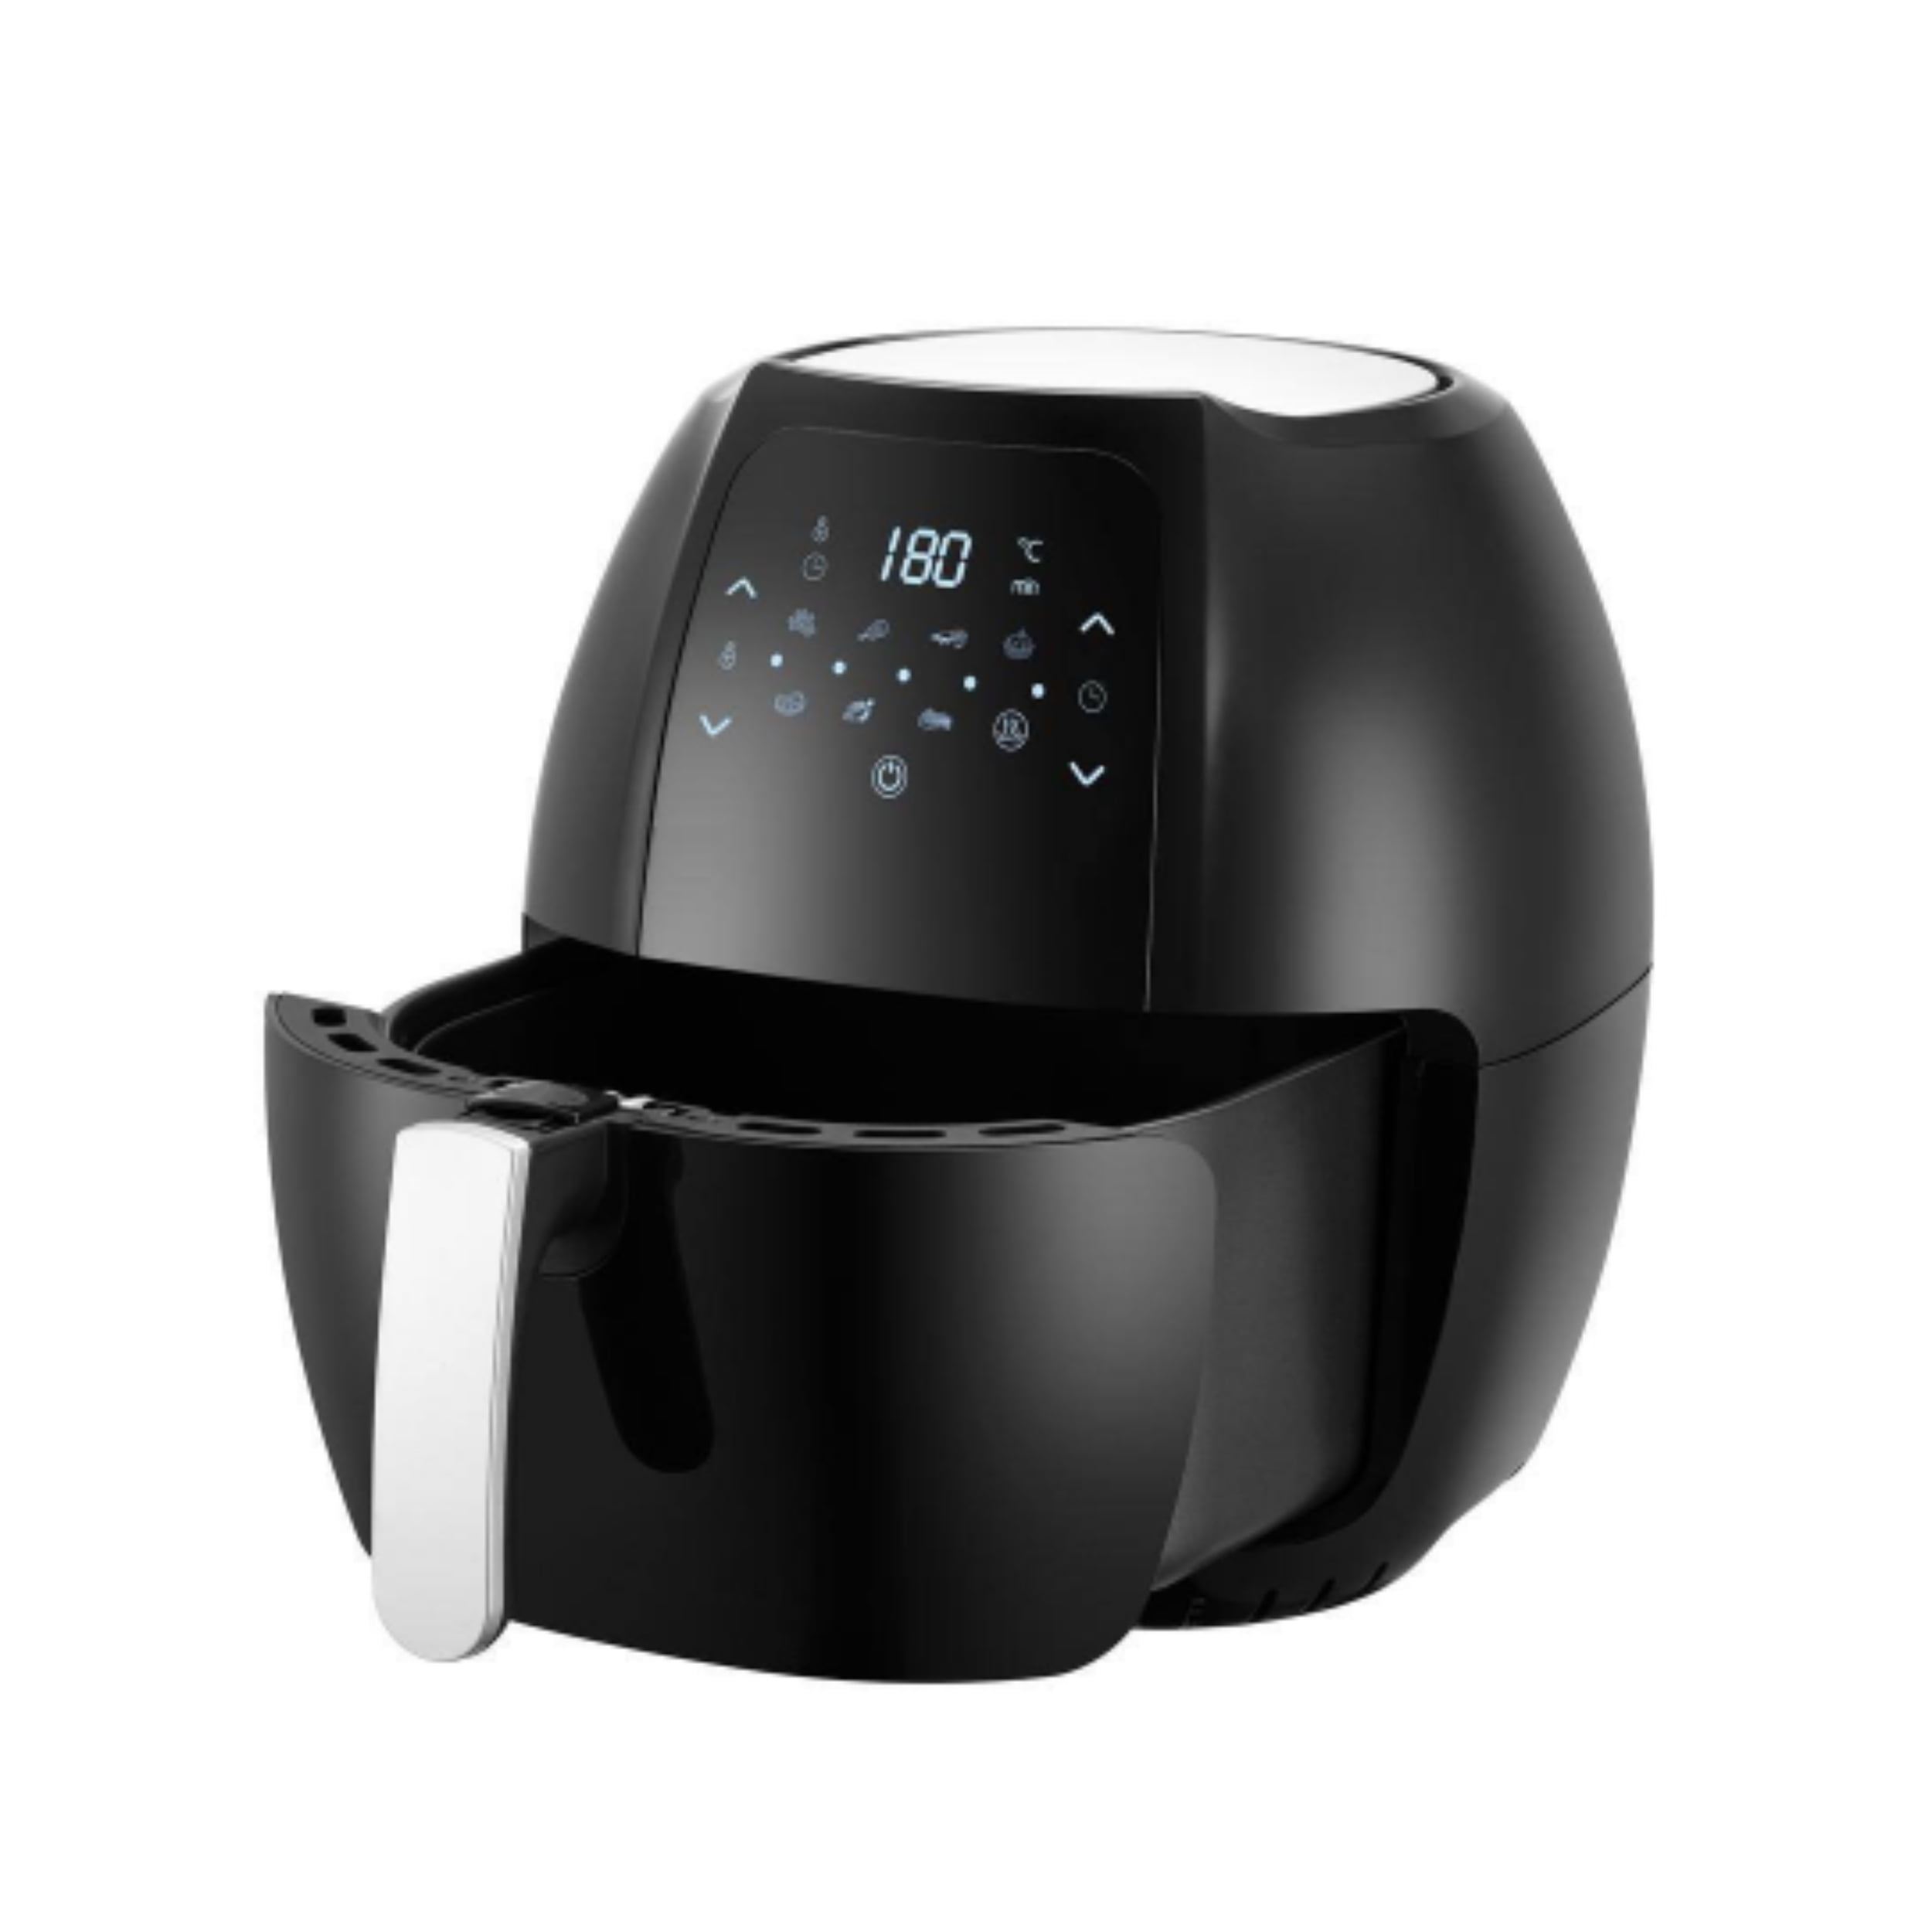 Frigidaire Digital Air Fryer Stainless Steel With Viewing Window 8.5 Quart  8 L